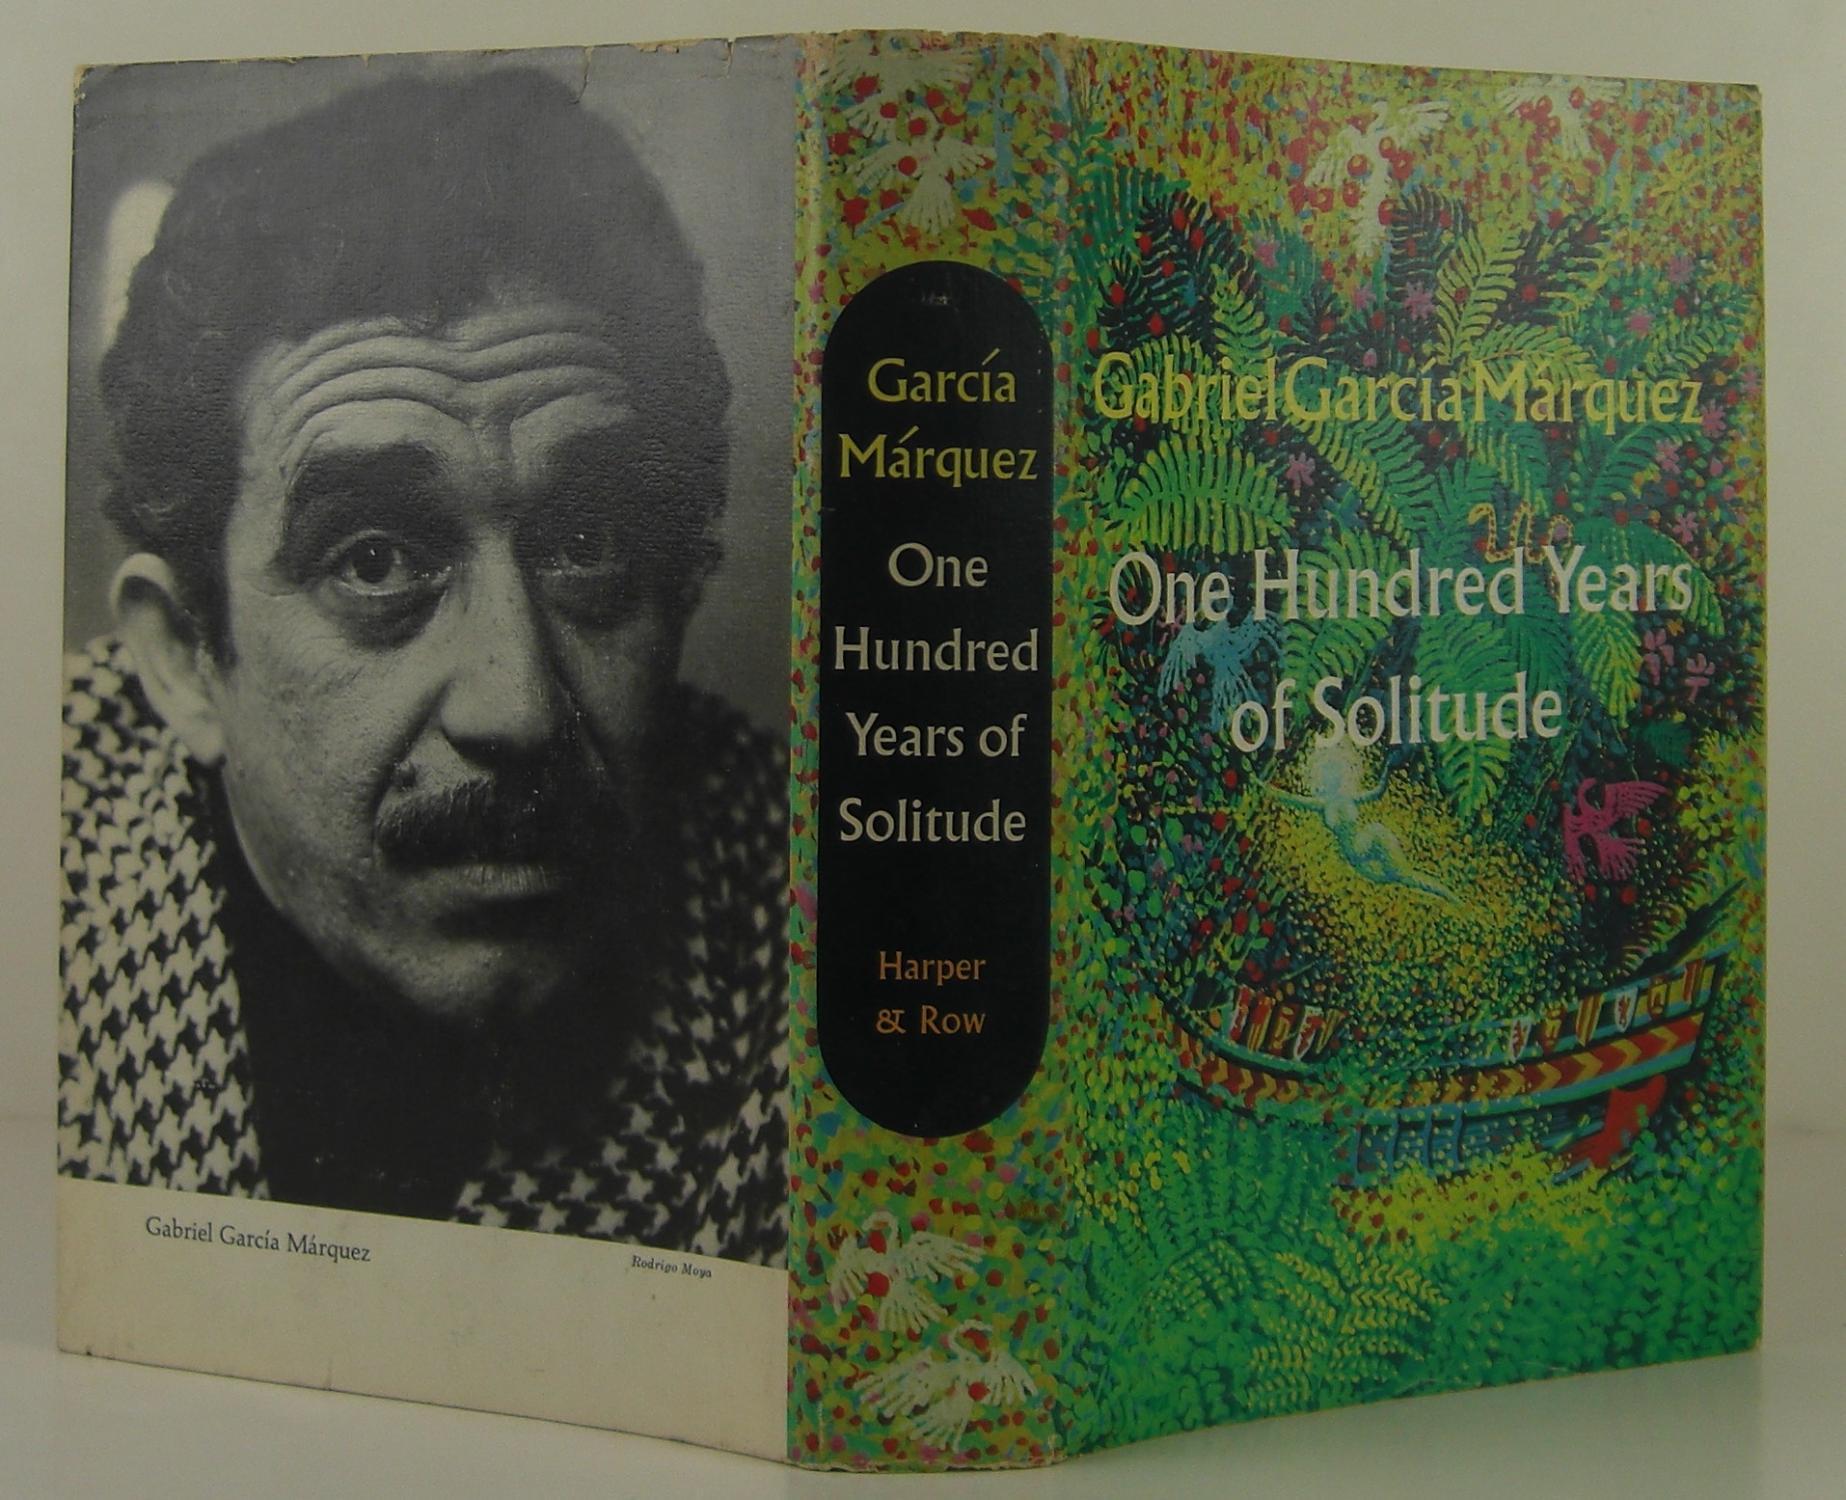 One hundred years is. One hundred years of Solitude by Gabriel García Márquez. One hundred years of Solitude. One hundred years of Solitude book. 100 Years of Solitude.